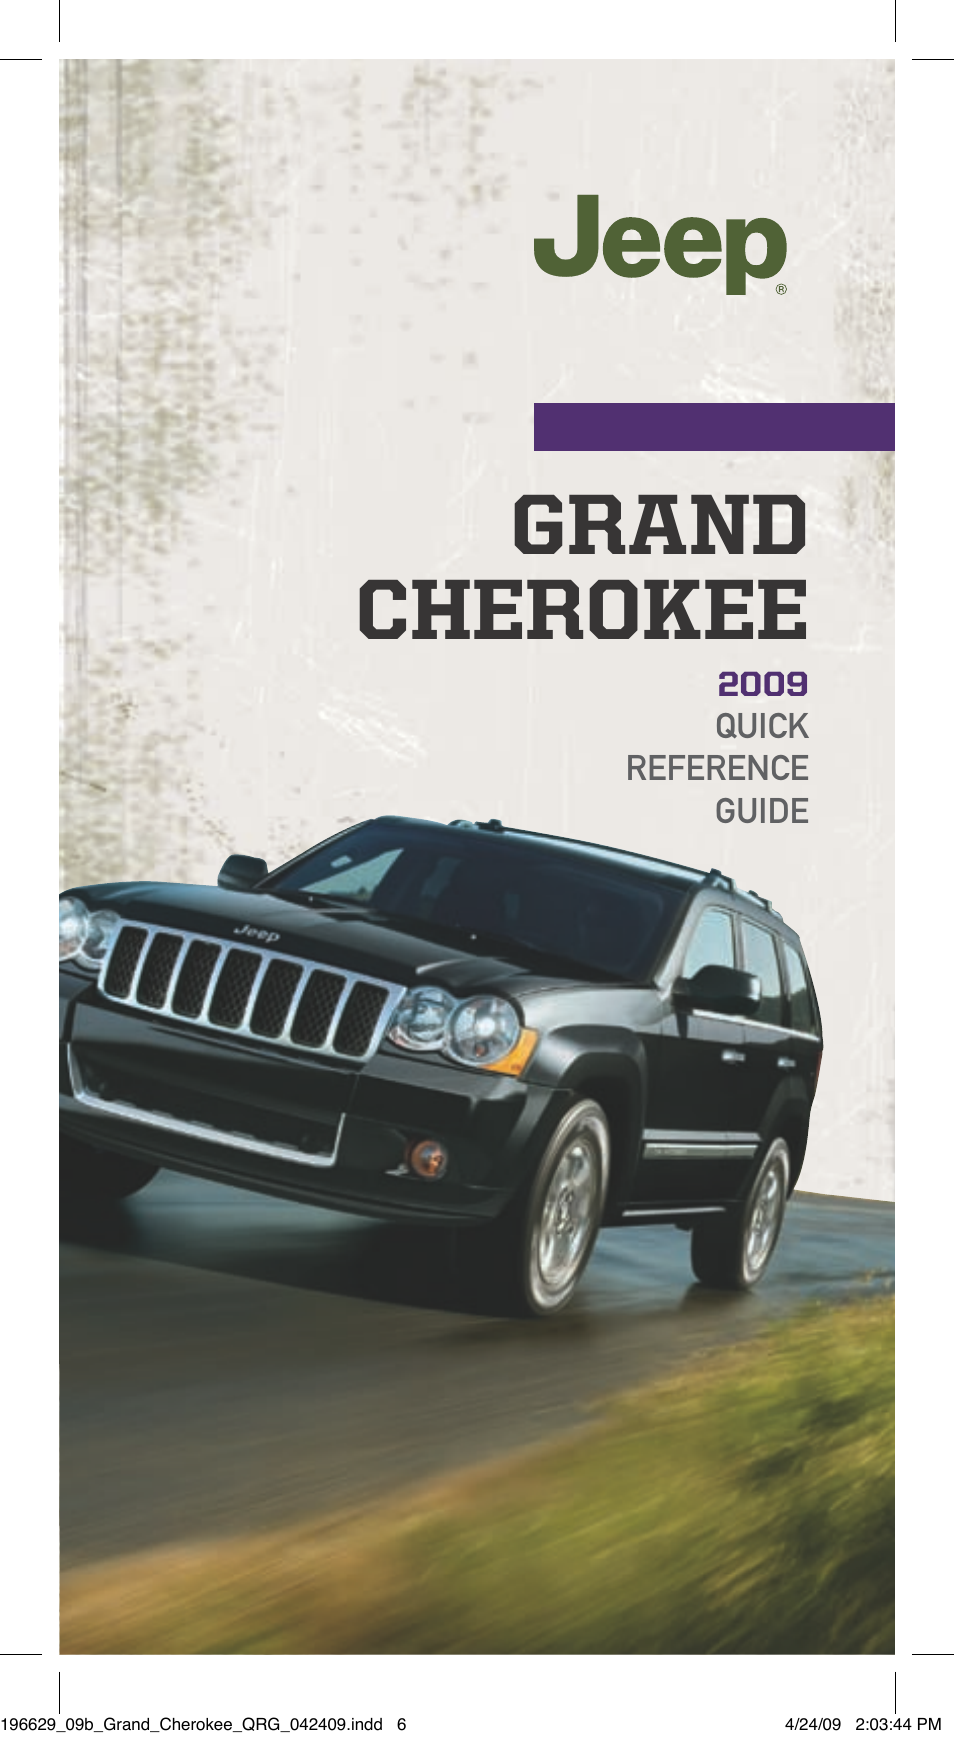 2009 Grand Cherokee SRT - Quick Reference Guide